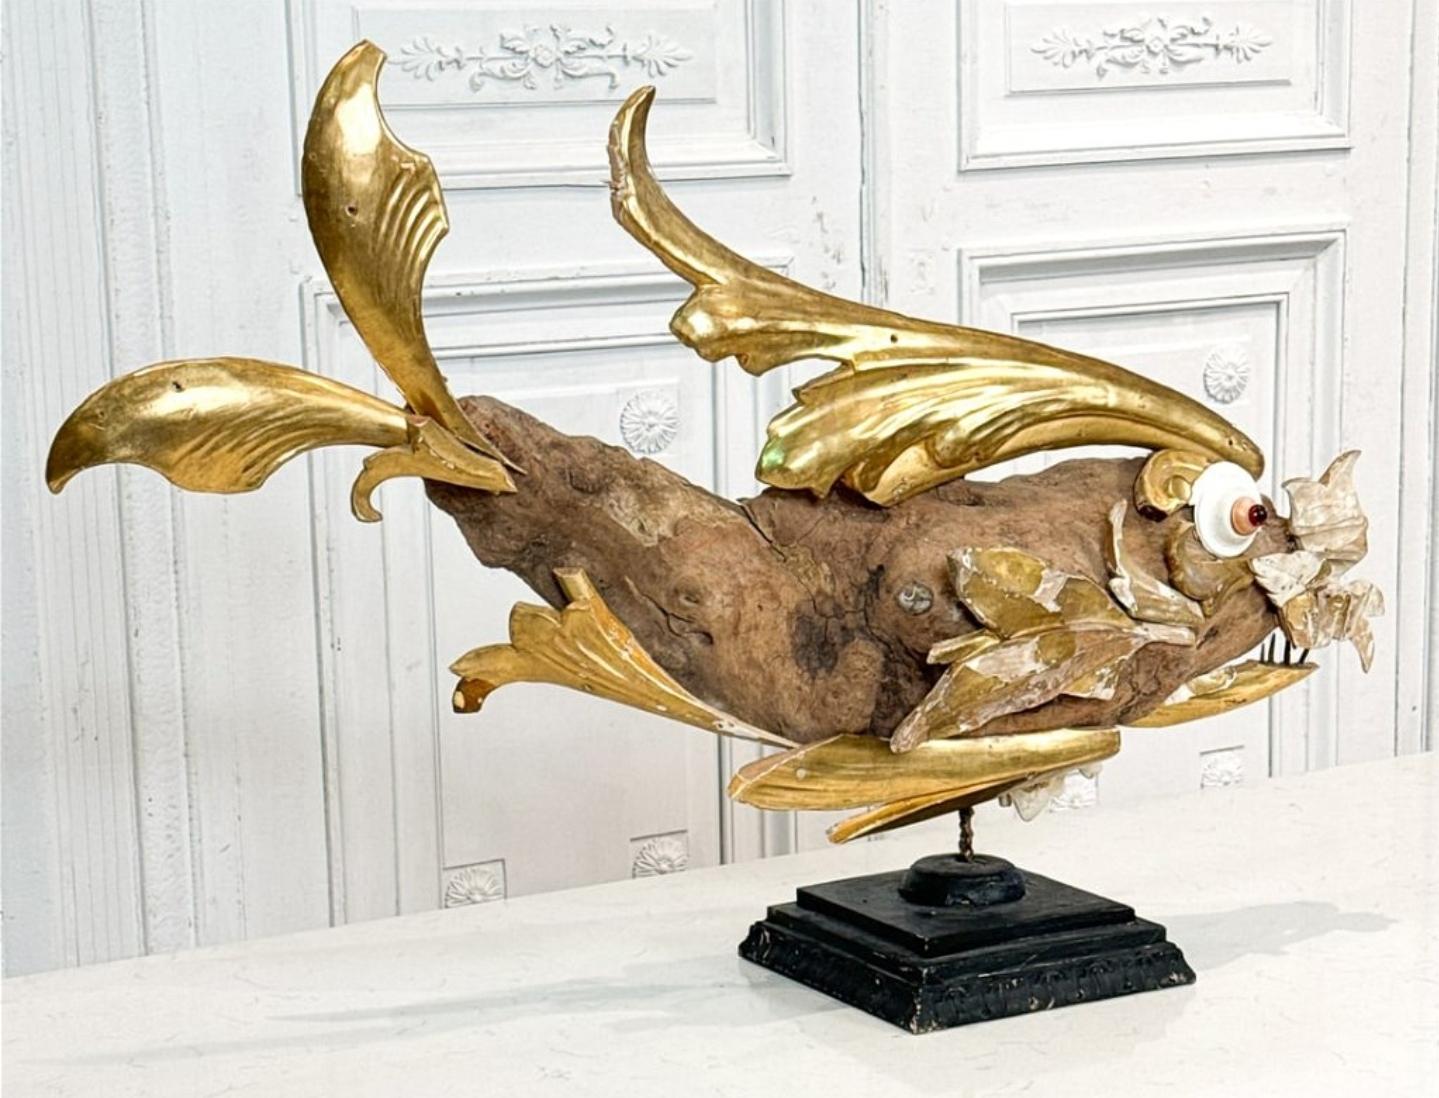 18th Century and Earlier Italian Folk Art Fish Sculpture from 18th/19th Century Fragments Found Objects For Sale